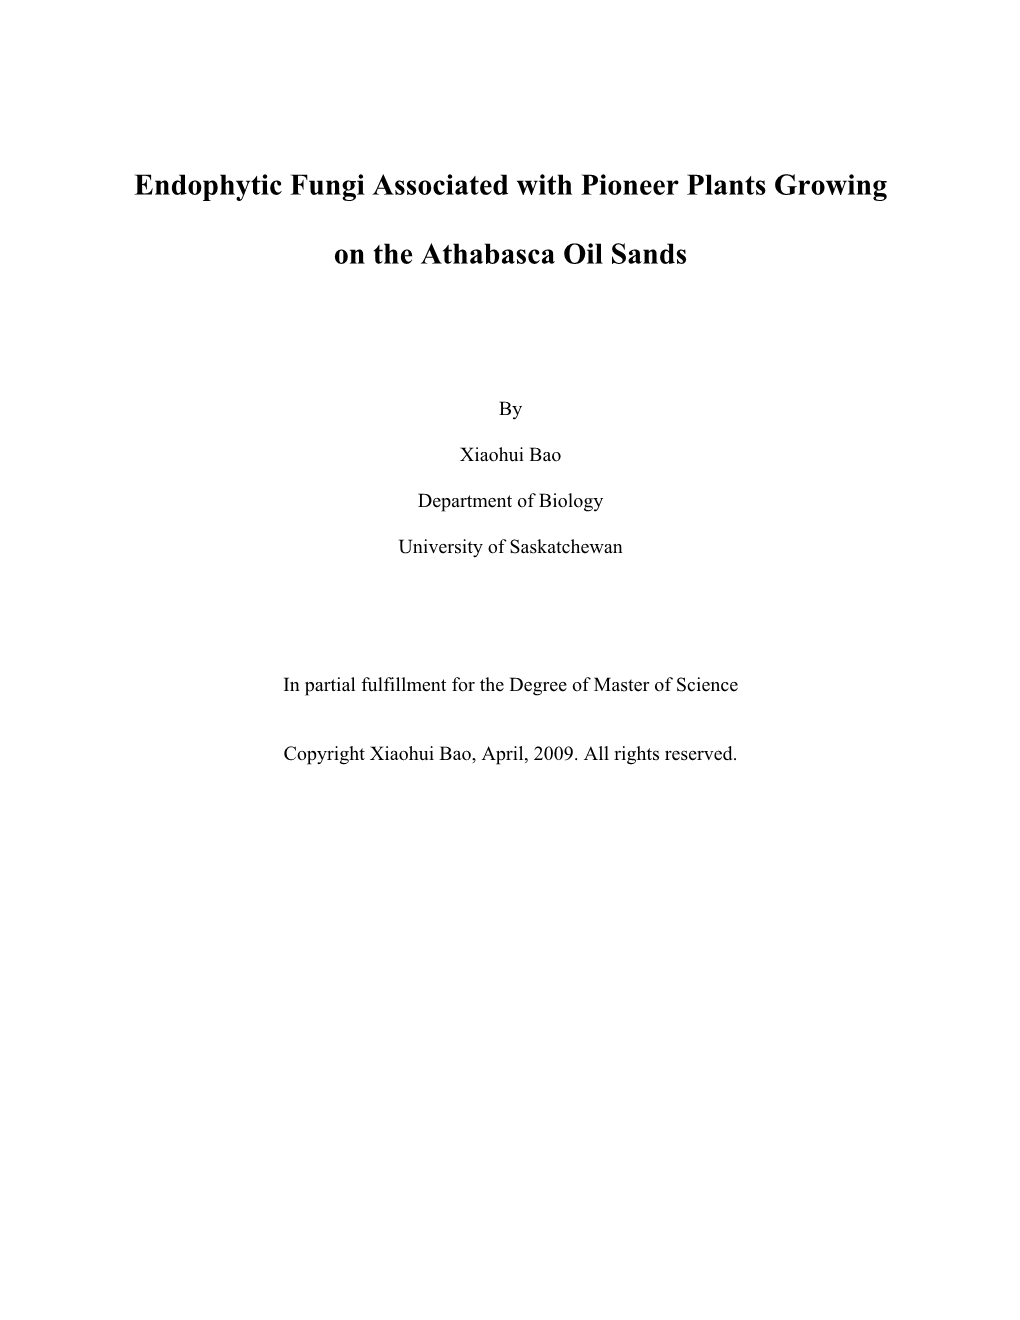 Endophytic Fungi Associated with Pioneer Plants Growing on The